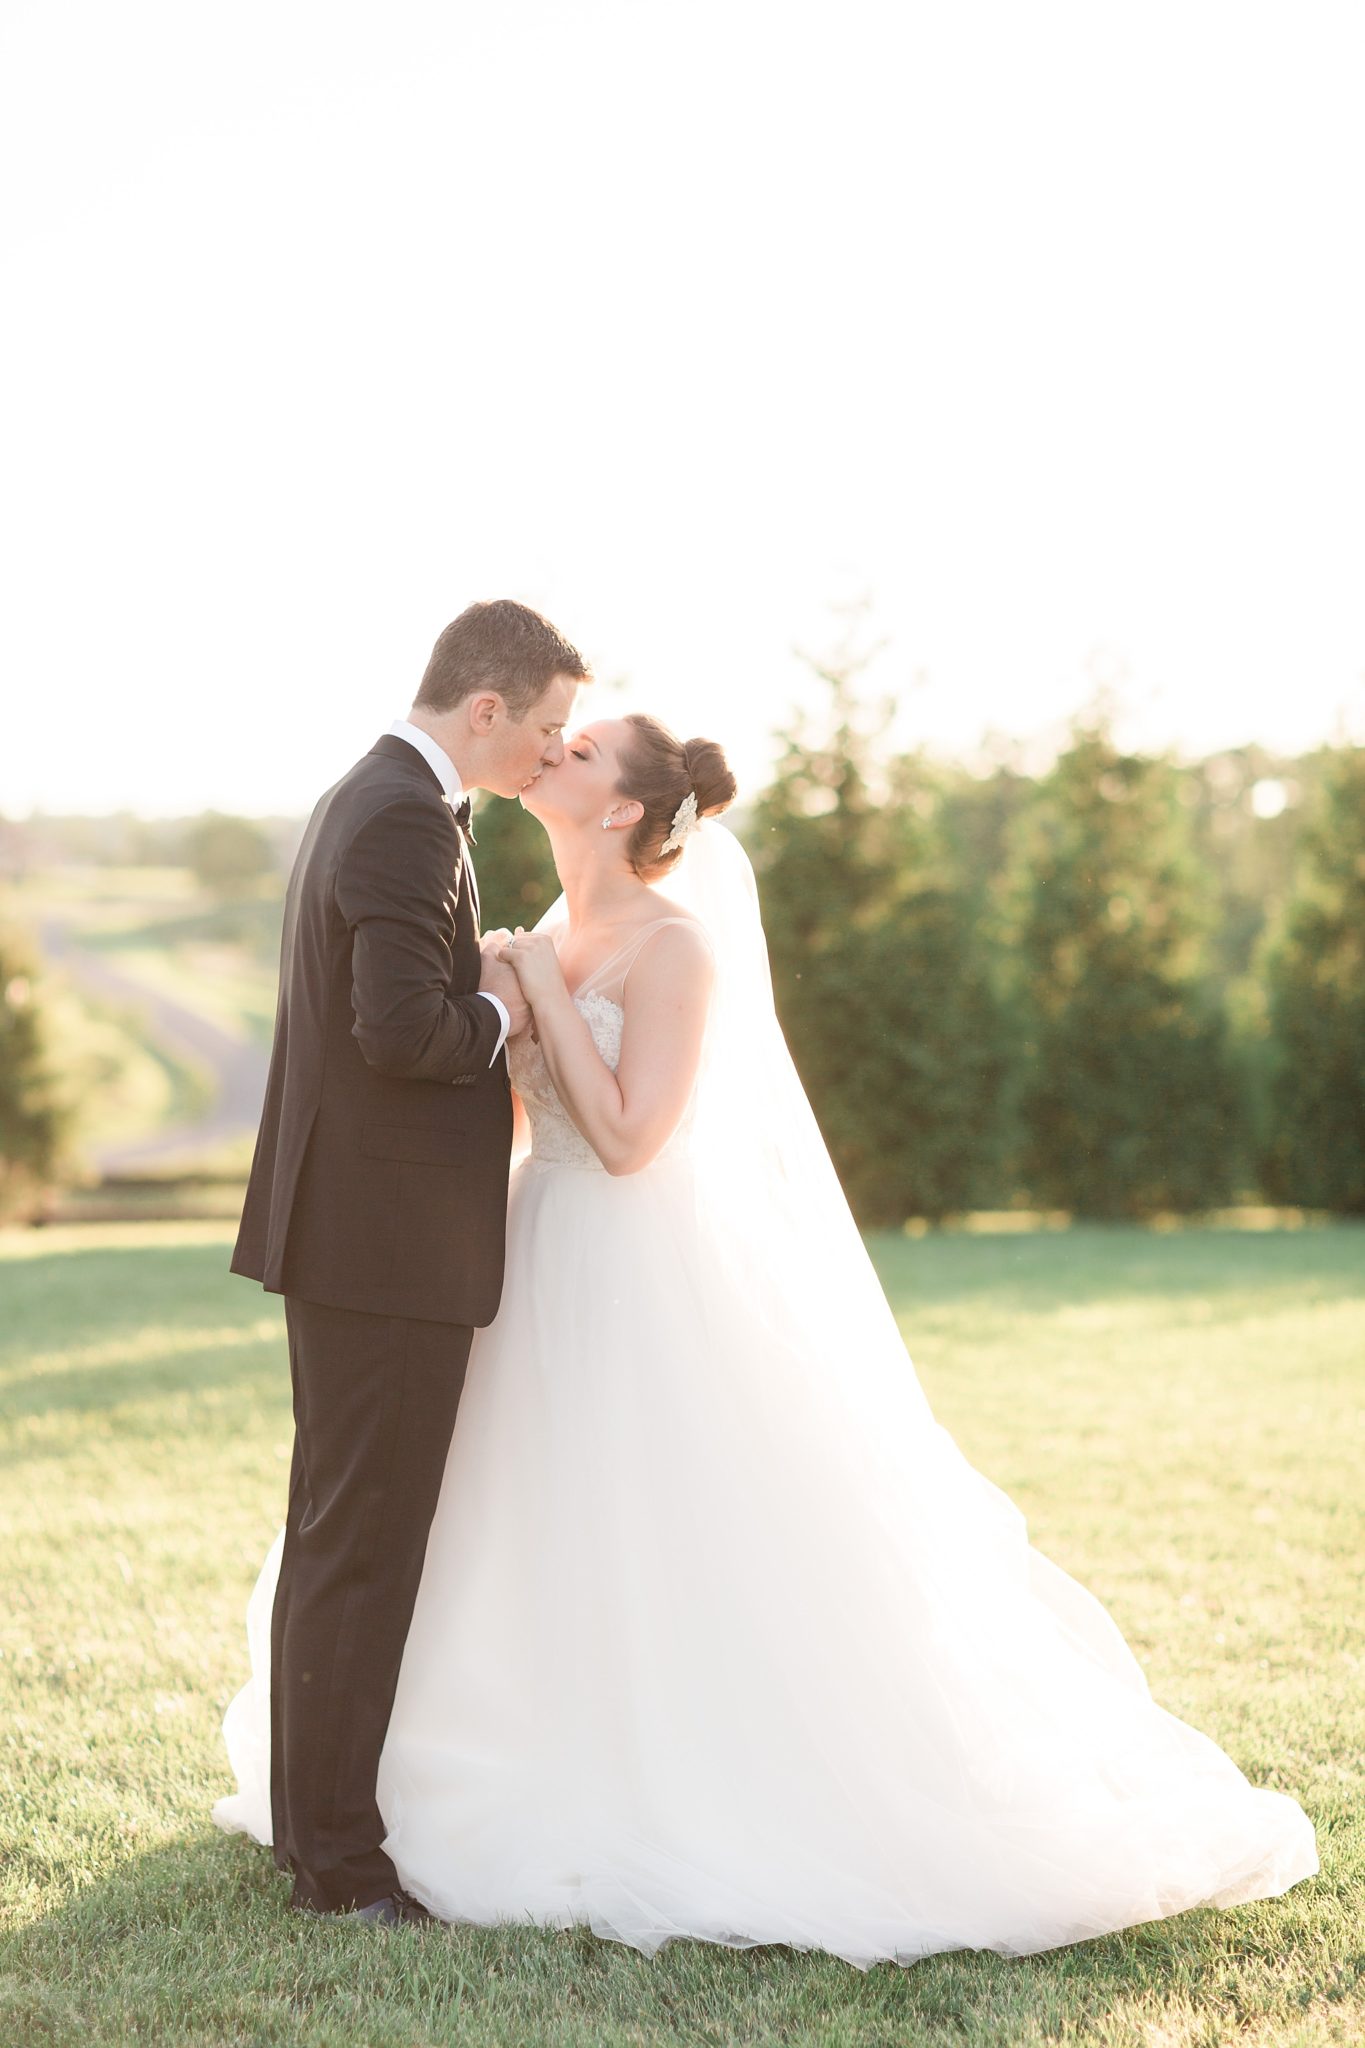 An intimate summer wedding is held at Shadow Creek Events in Loudoun County, VA. Images photographed by Washington, DC wedding photographer, Alicia Lacey